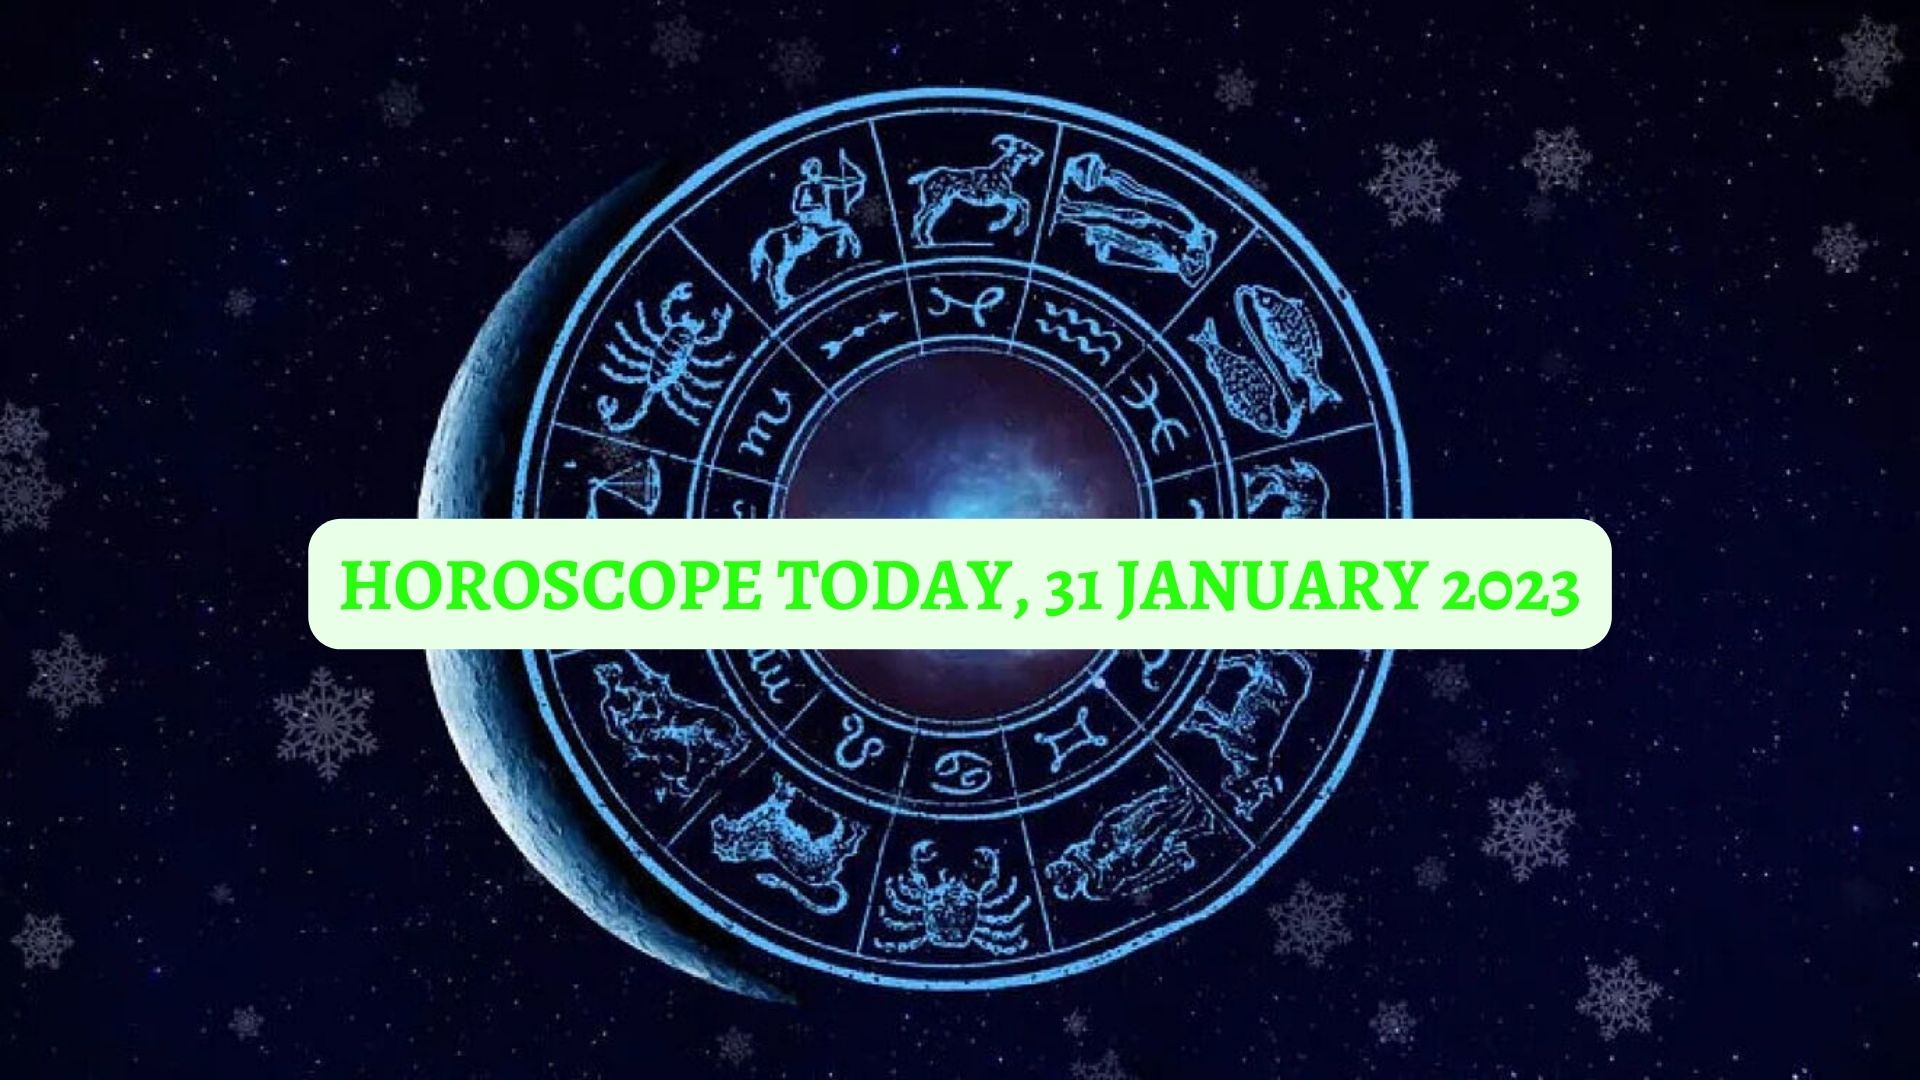 Horoscope Today, 31 January 2023 - Read Astrological Predictions Here